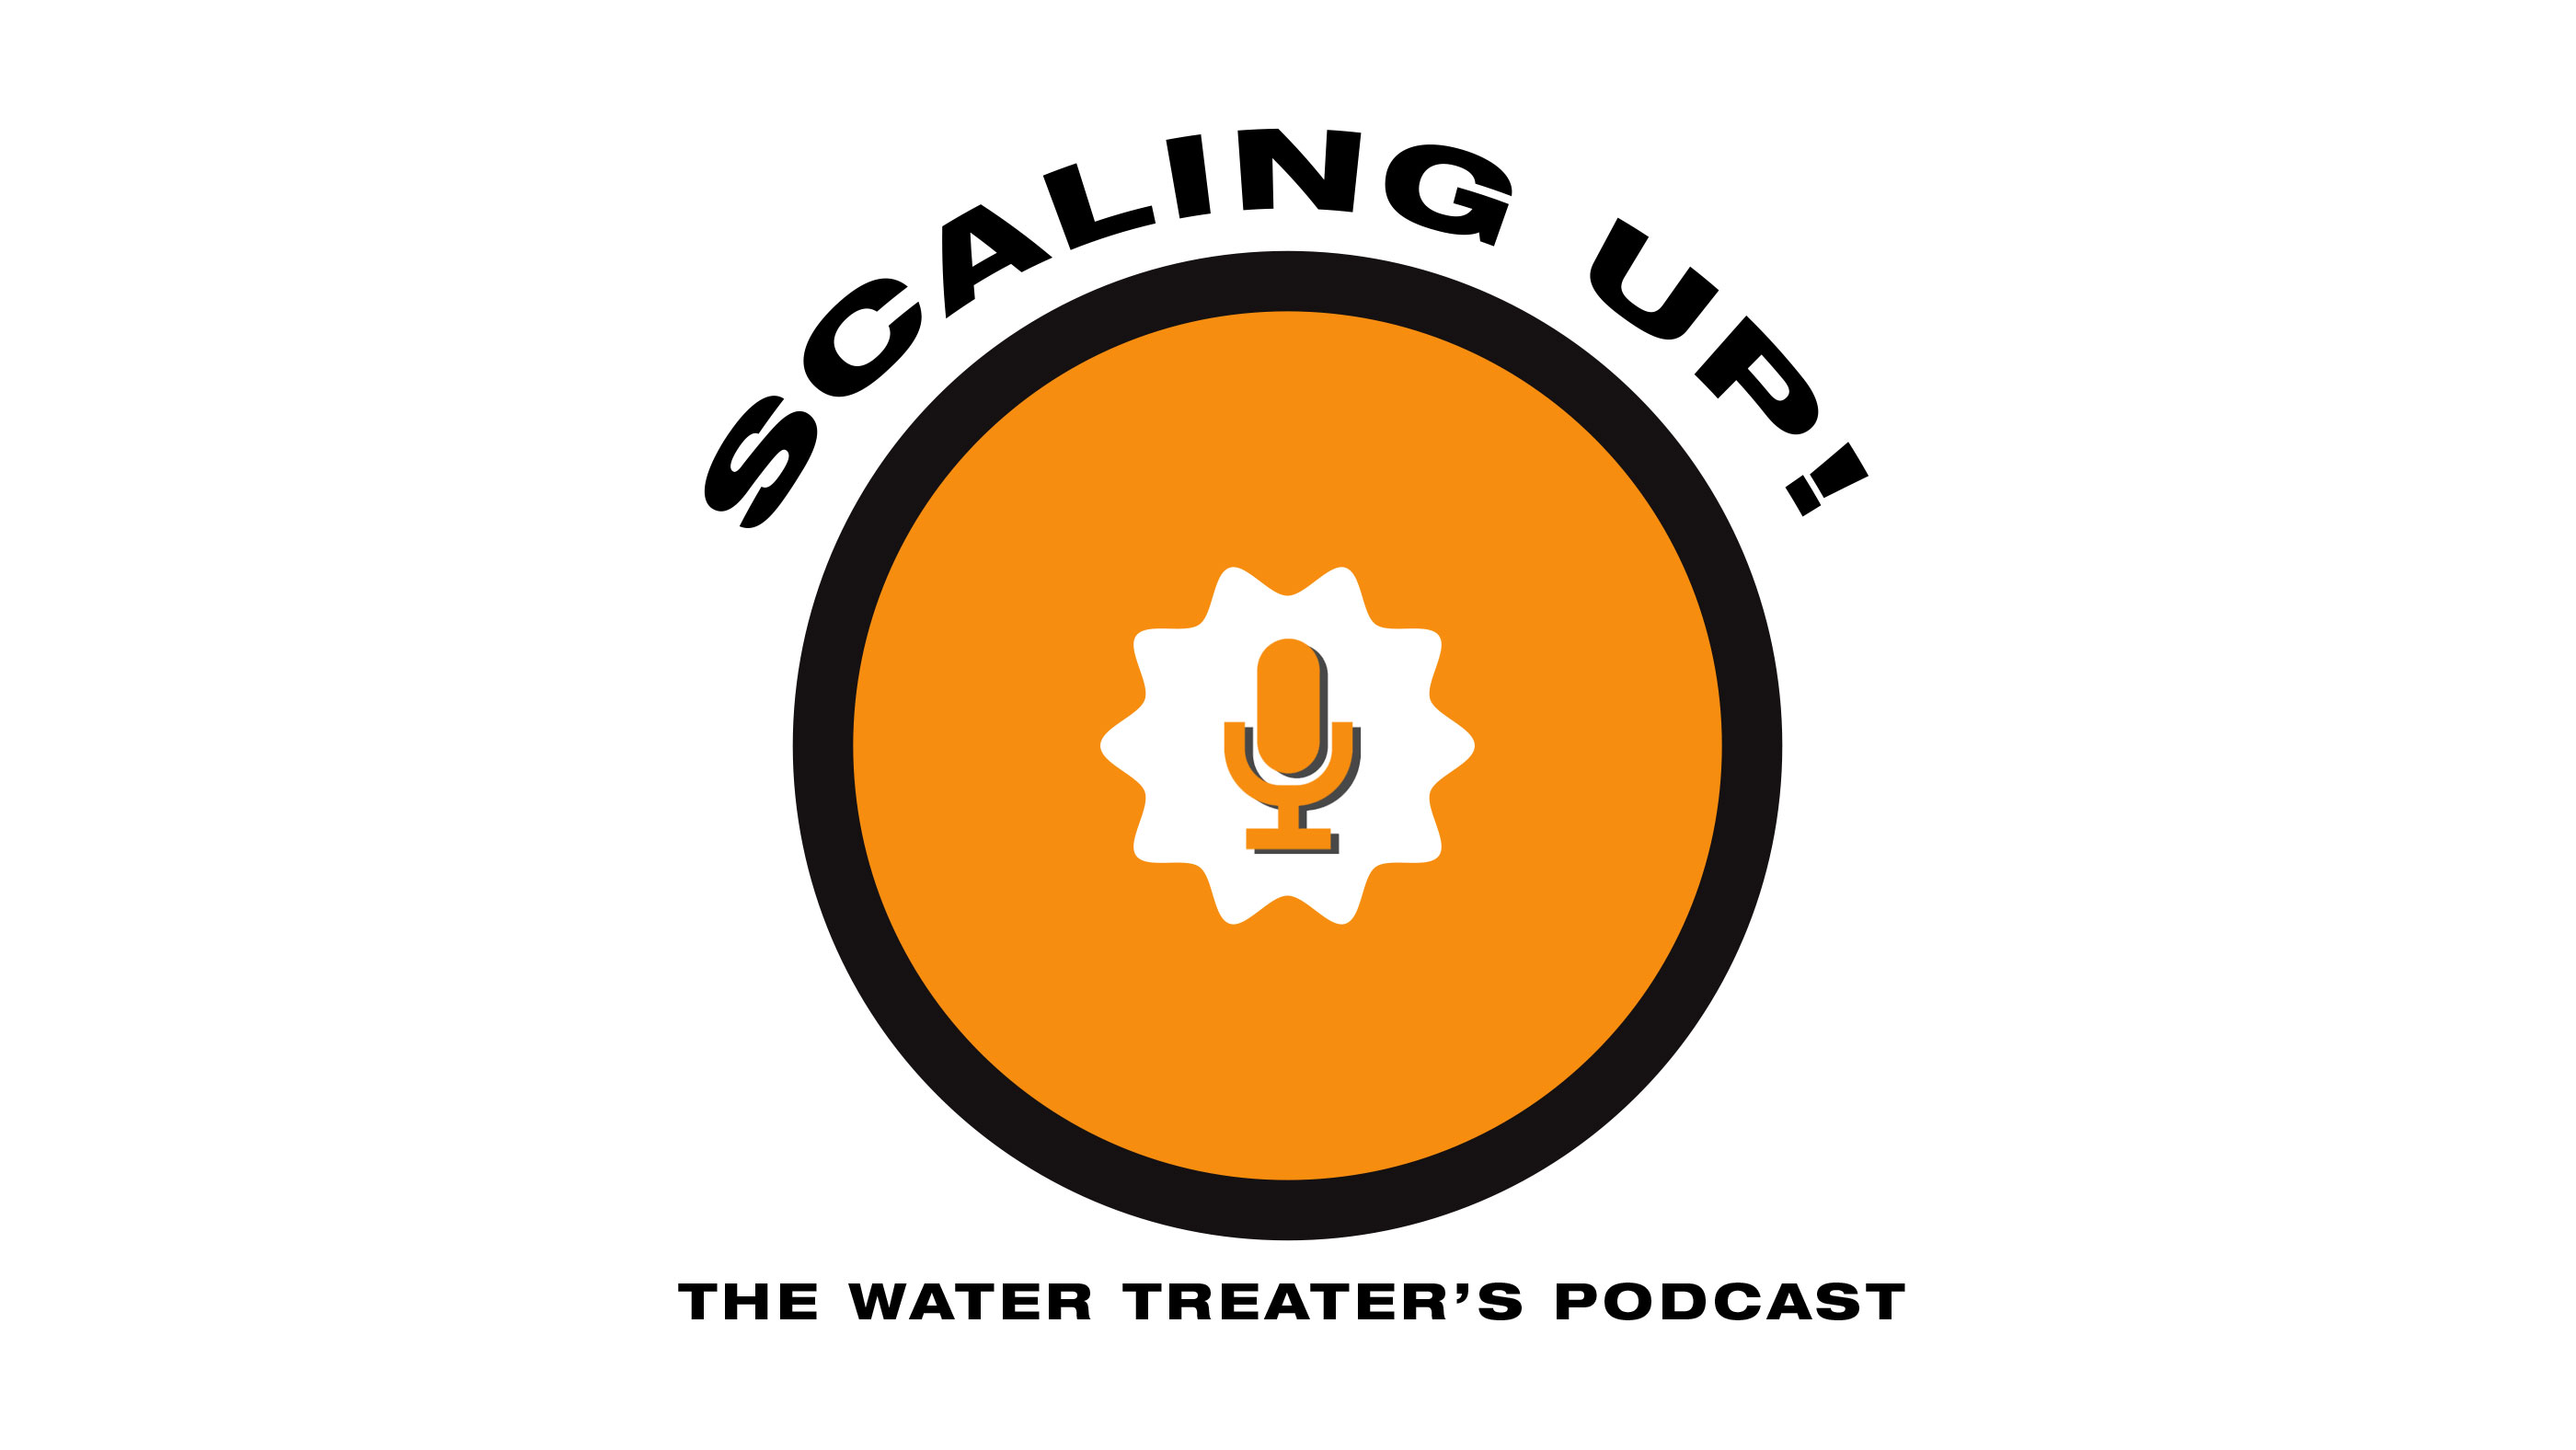 Scaling UP! - The Podcast for Water Treaters by Water Treaters